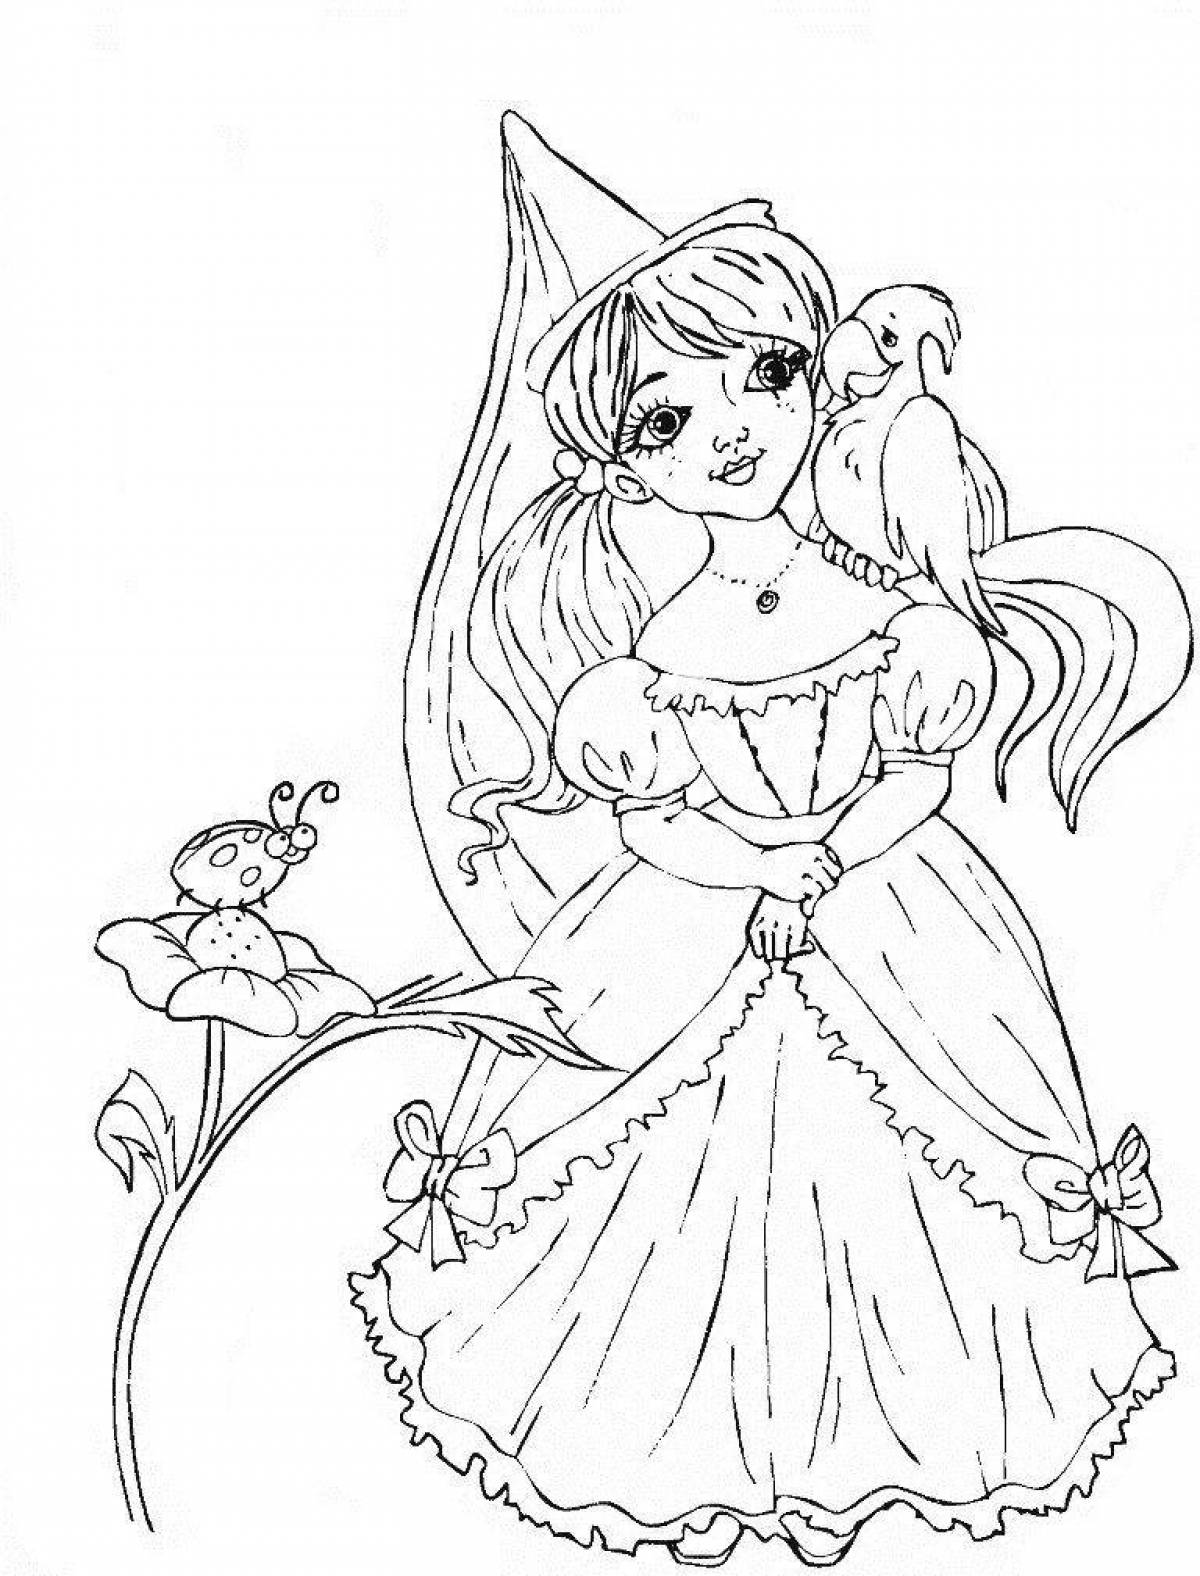 Coloring page nice sorceress